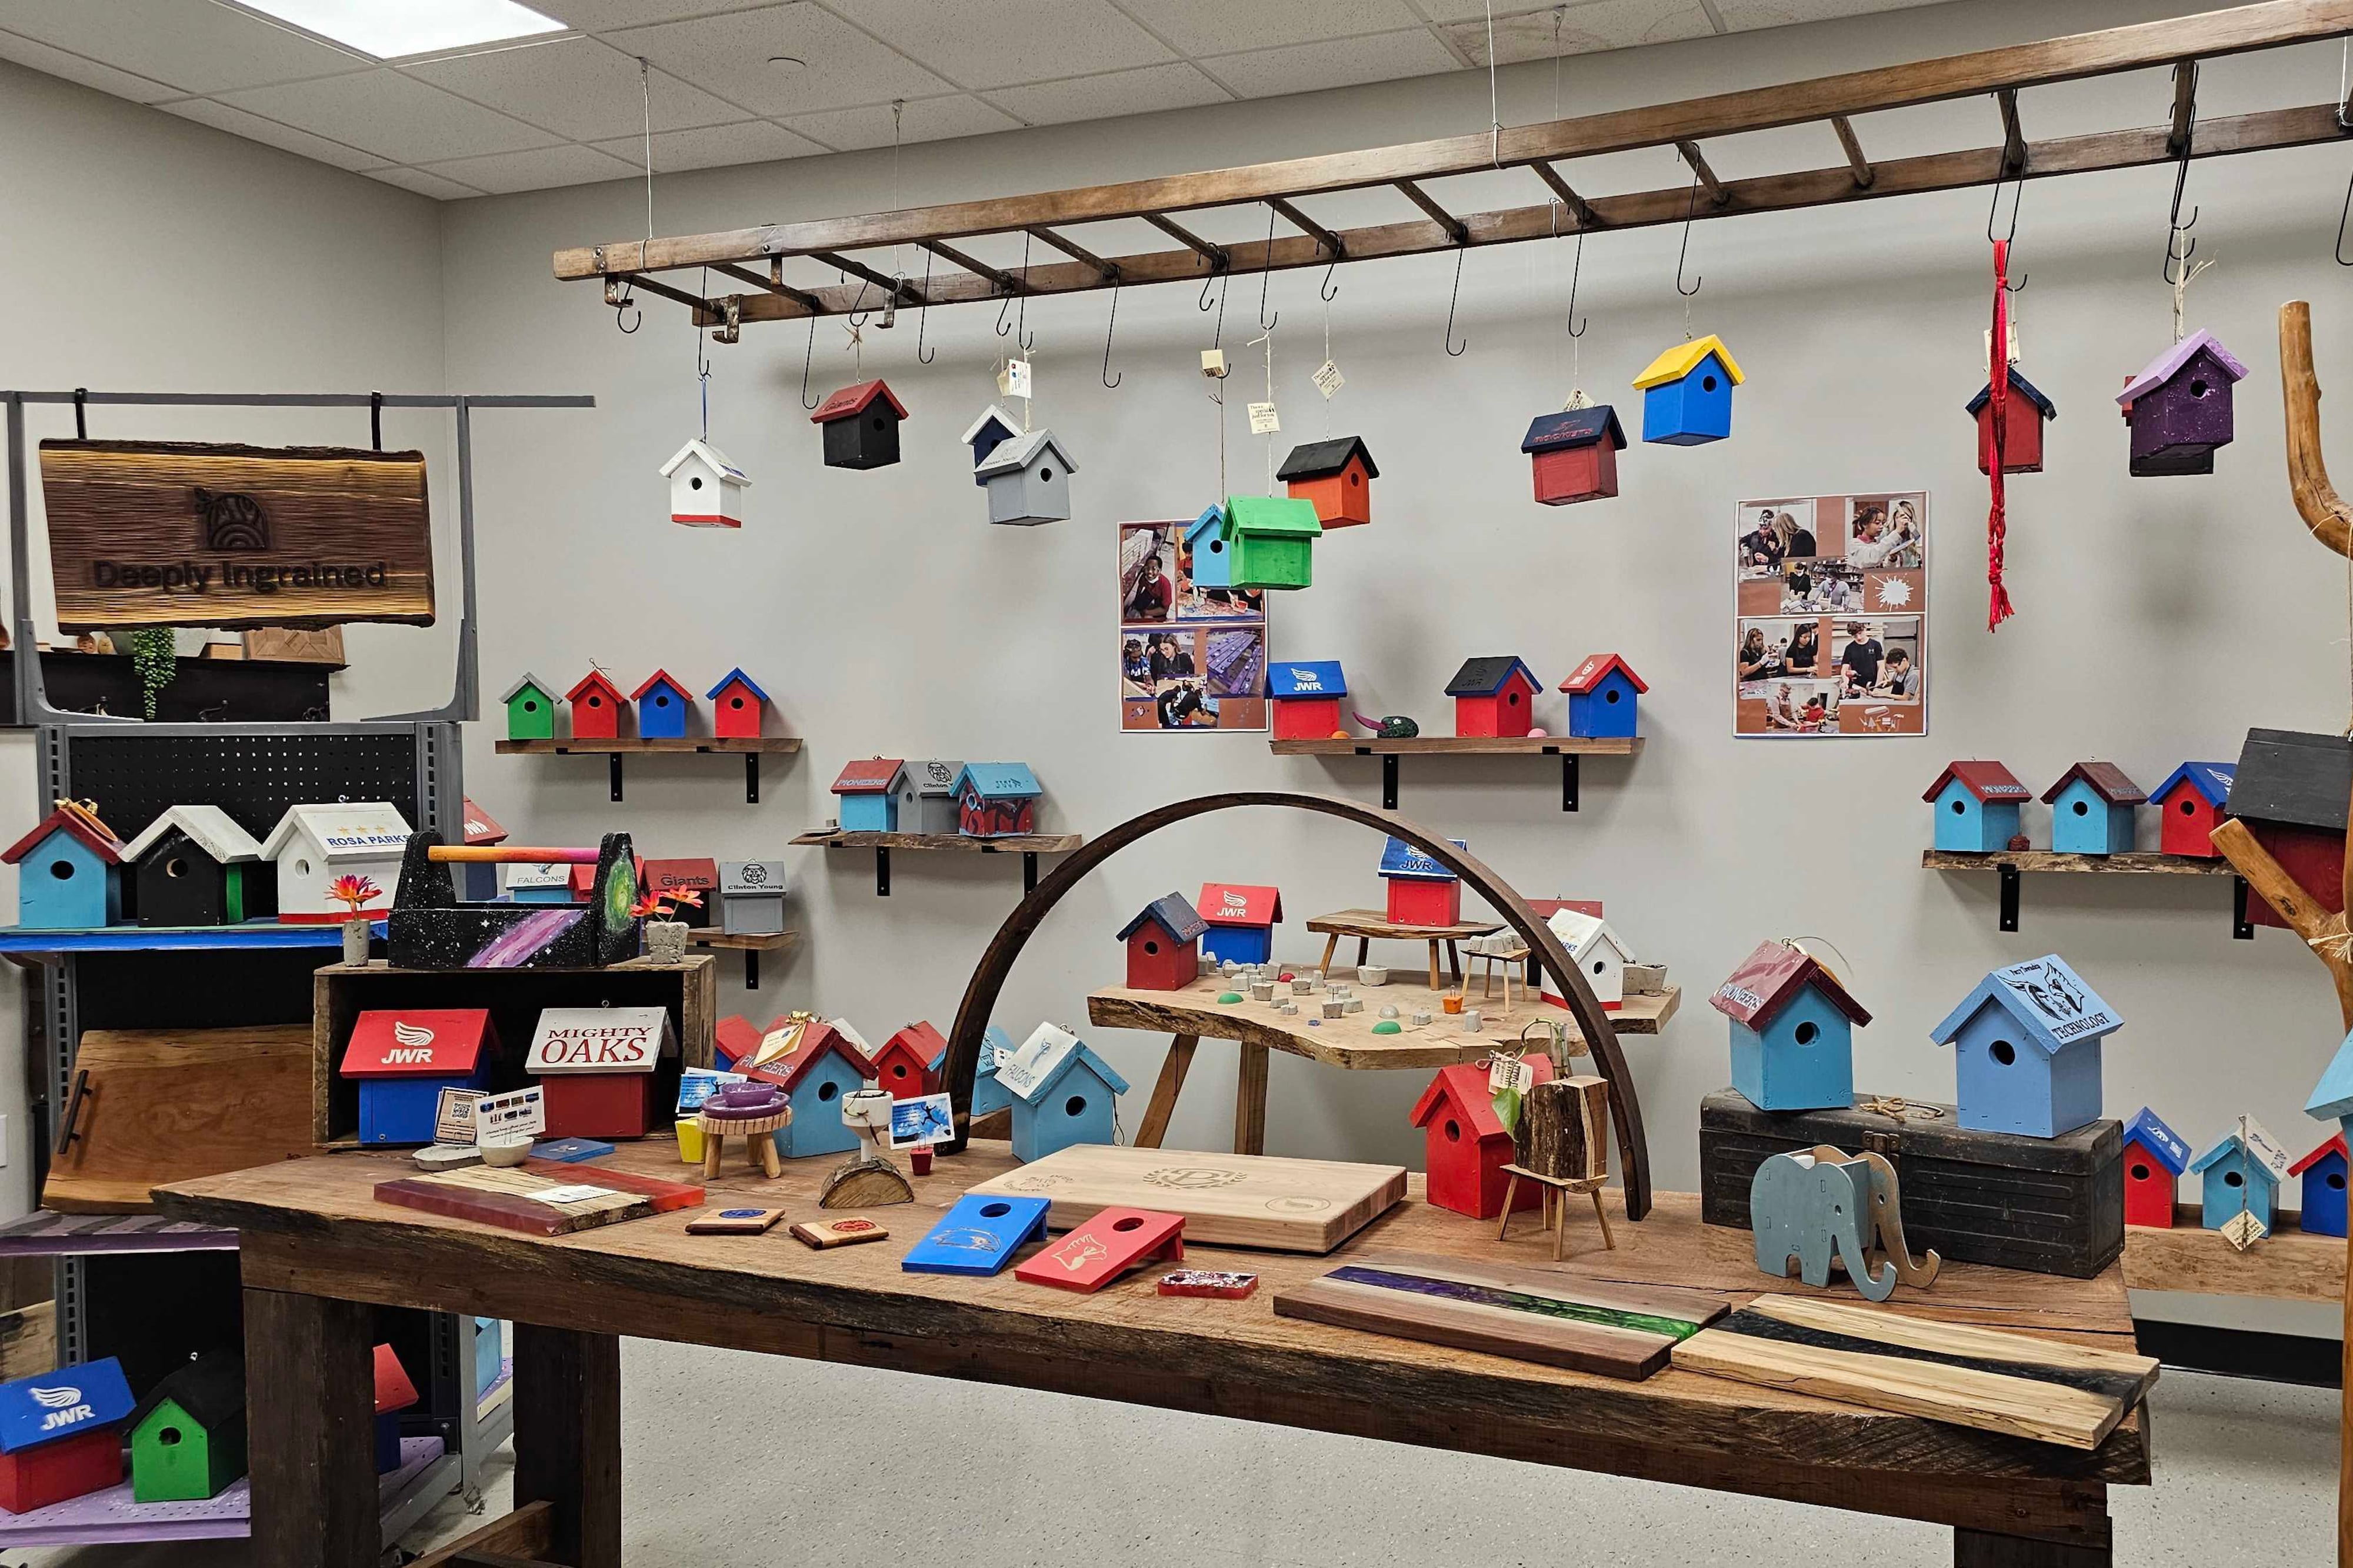 Dozens of multicolored birdhouses are hanging from the ceiling and displayed on shelves and counter space inside of a middle school's woodshop.